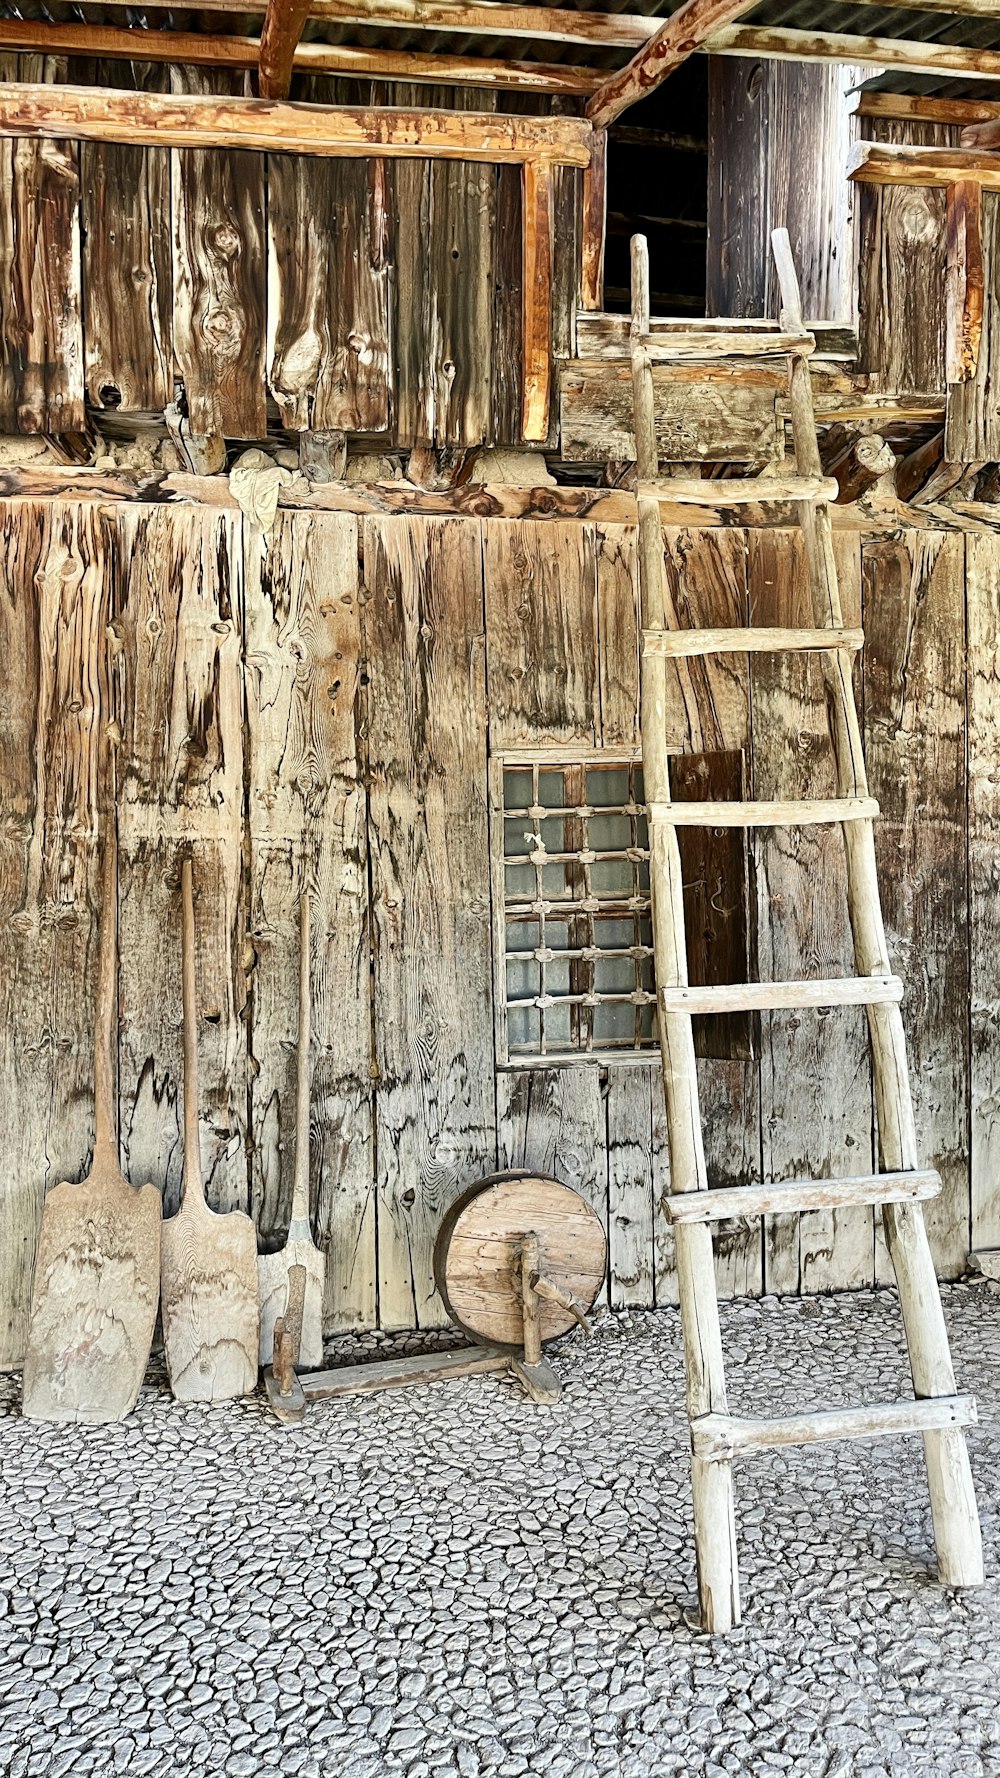 a ladder leaning up against a wooden wall